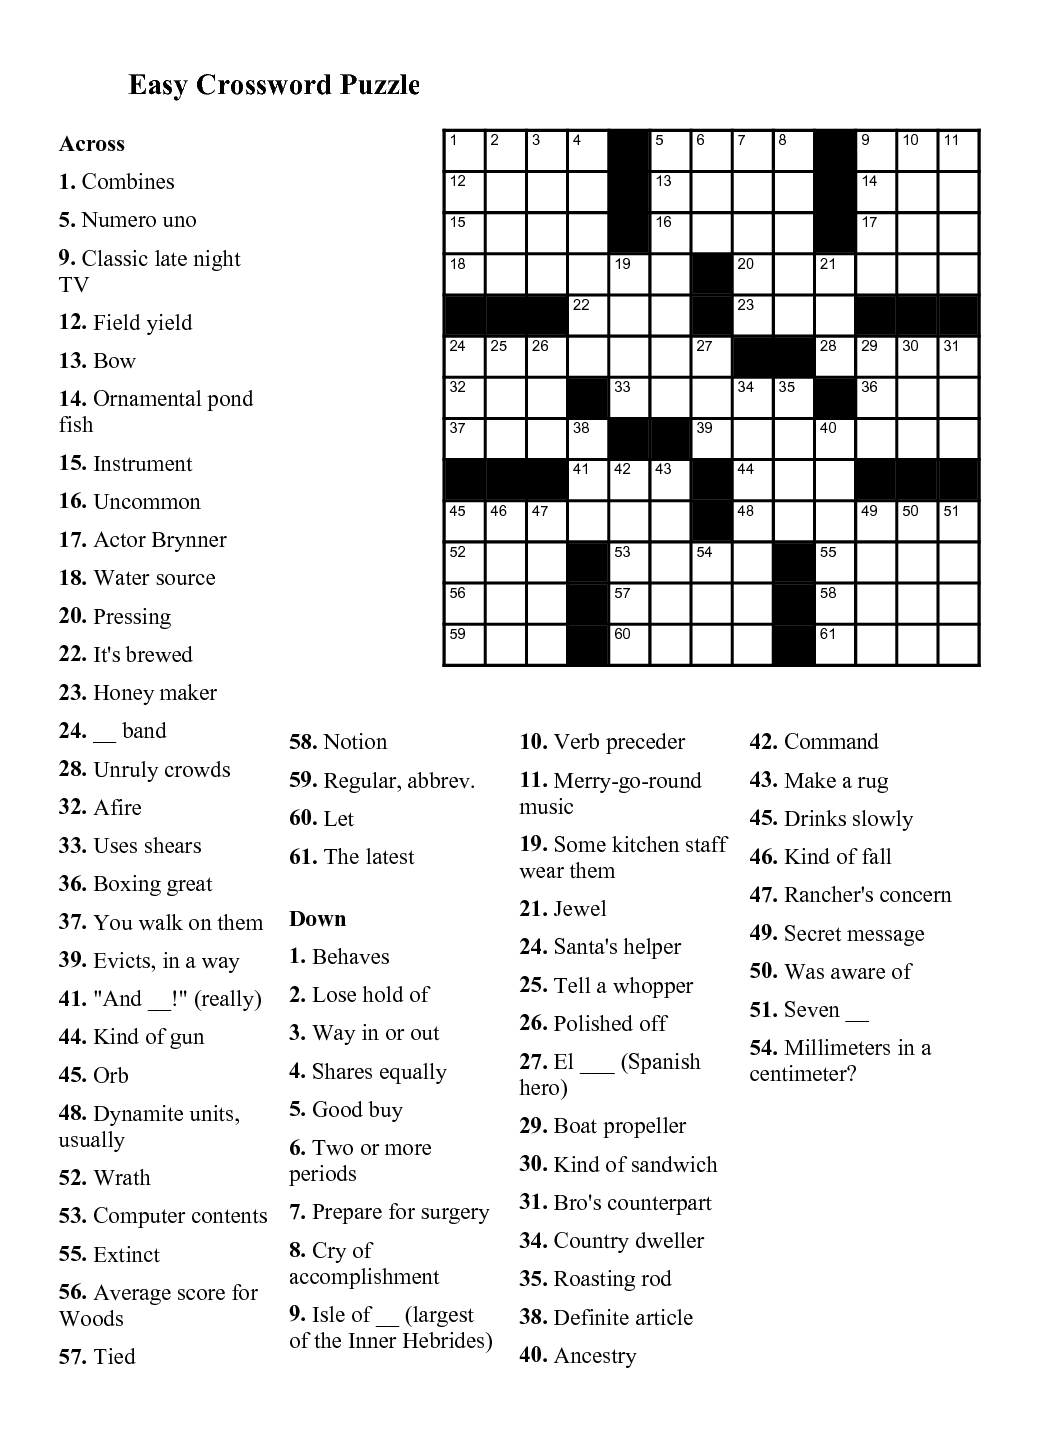 Easy Crossword Puzzles Printable Daily Template - Free Crossword Puzzles Printable Easy